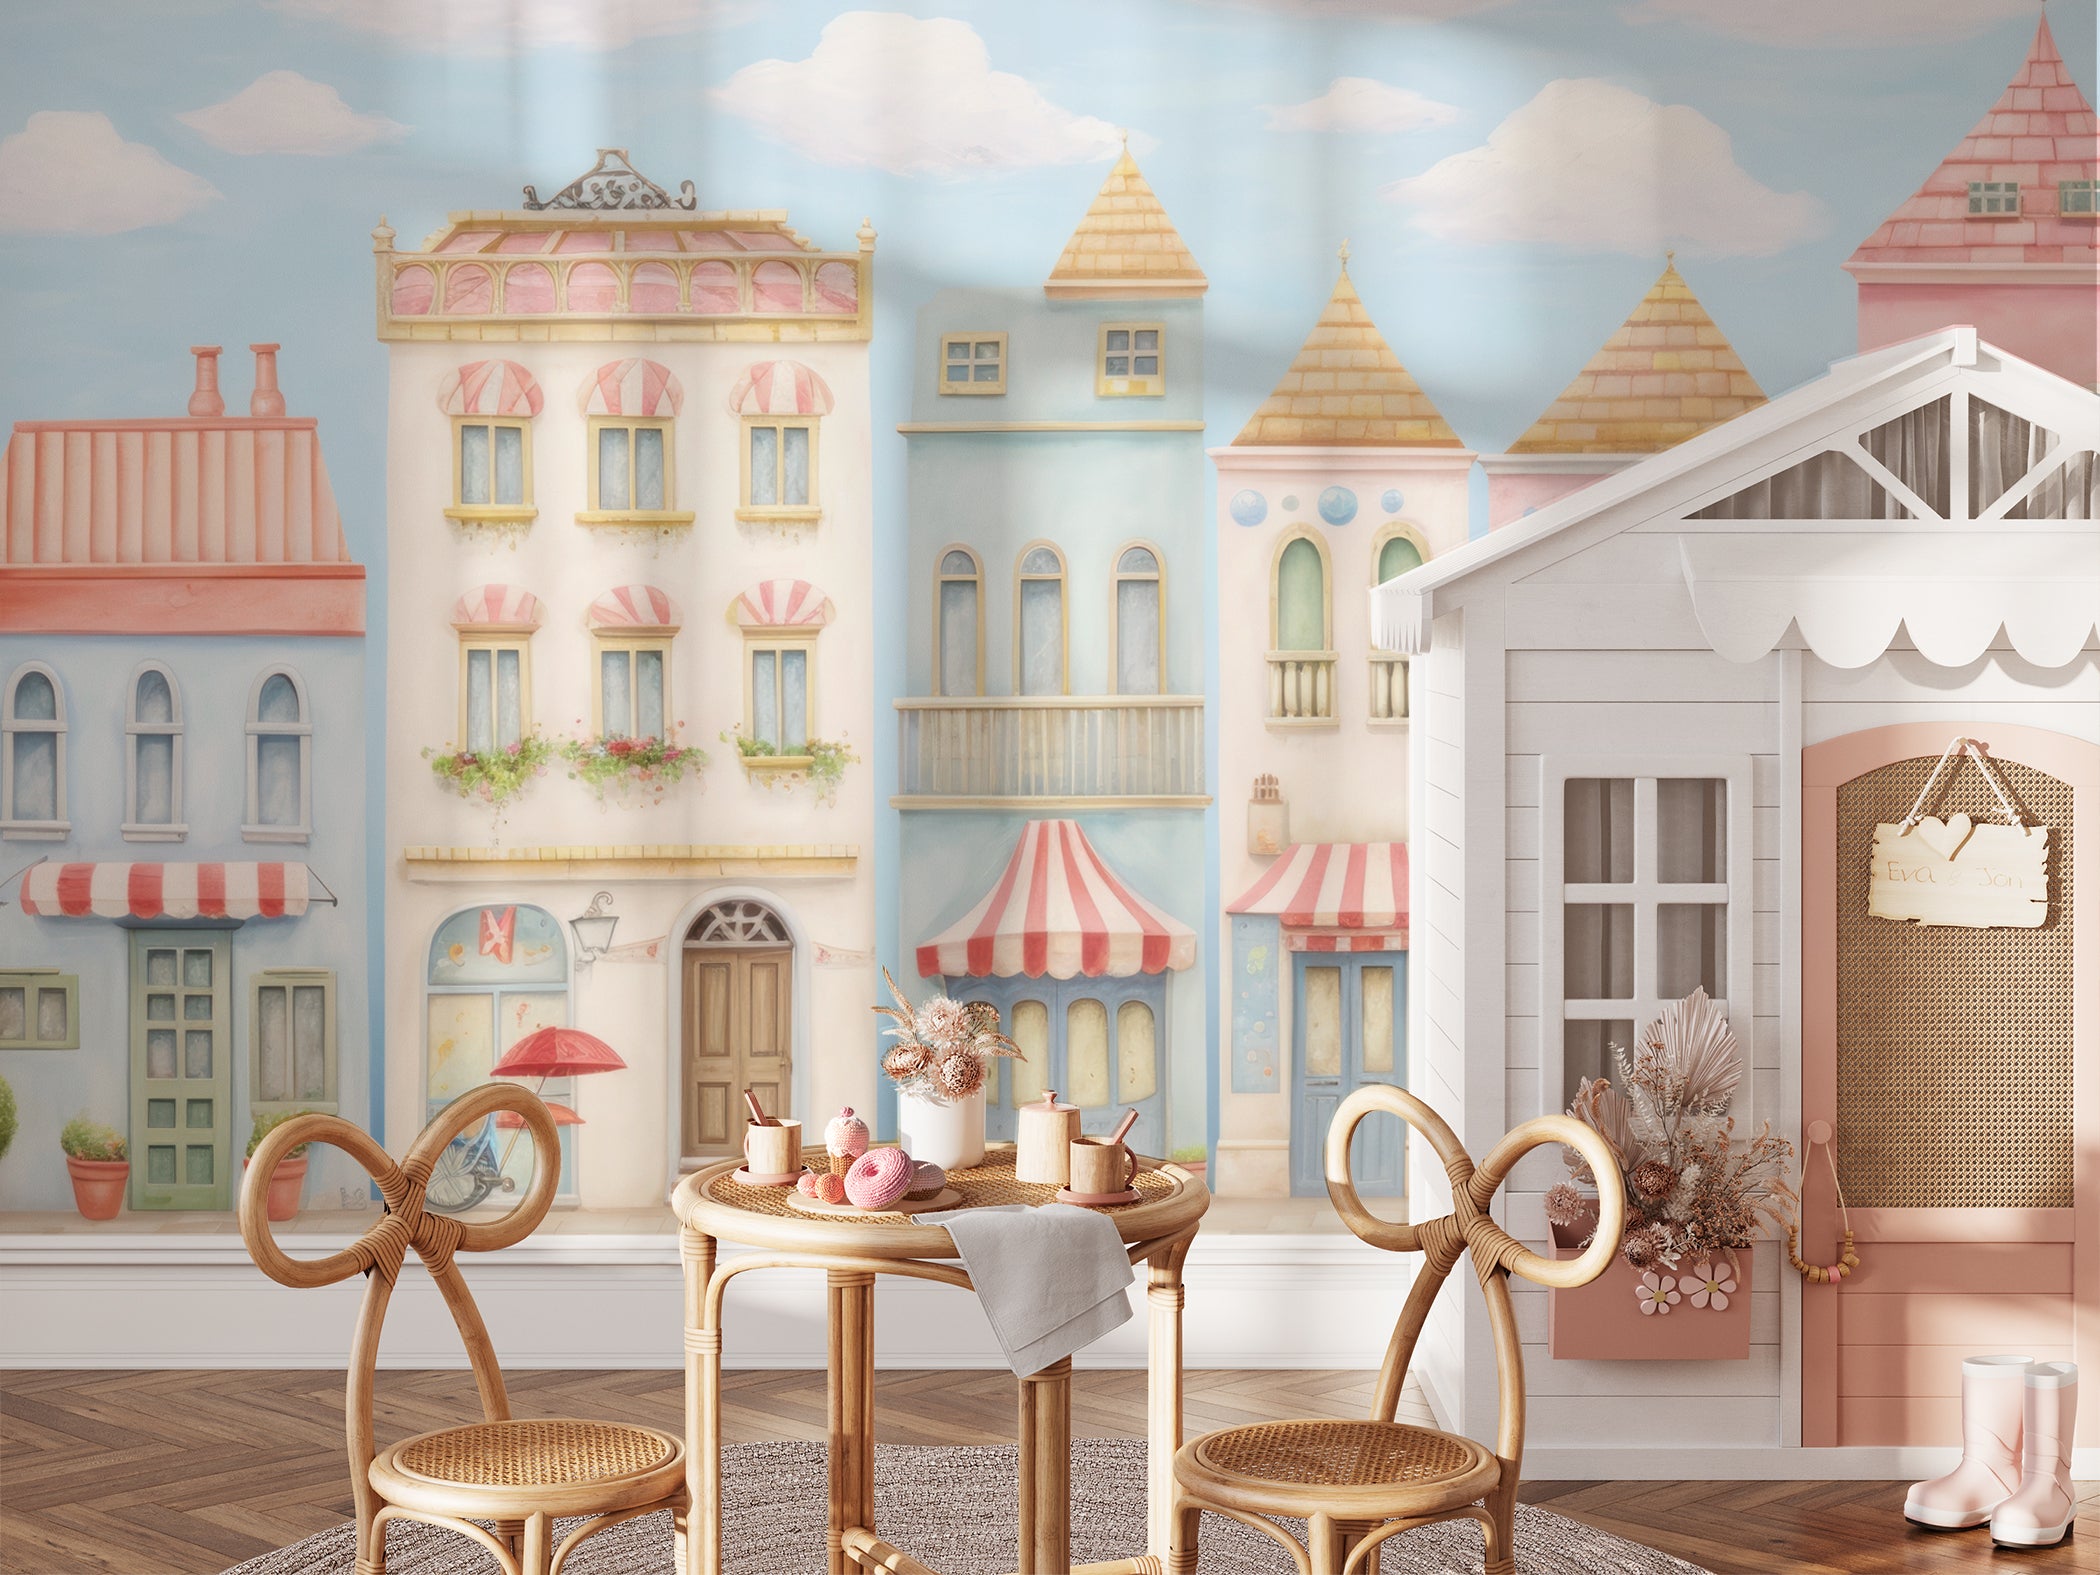 A children's play area adorned with the Andalusia Townhouse Wallpaper, depicting a row of pastel-colored townhouses with whimsical details. The space includes a small round table with chairs and a white playhouse, adding to the enchanting atmosphere.